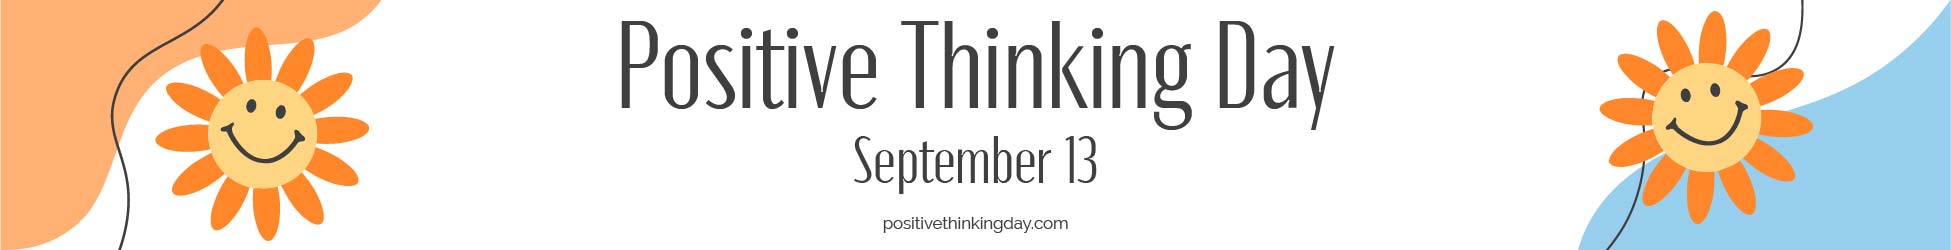 Positive Thinking Day Website Banner